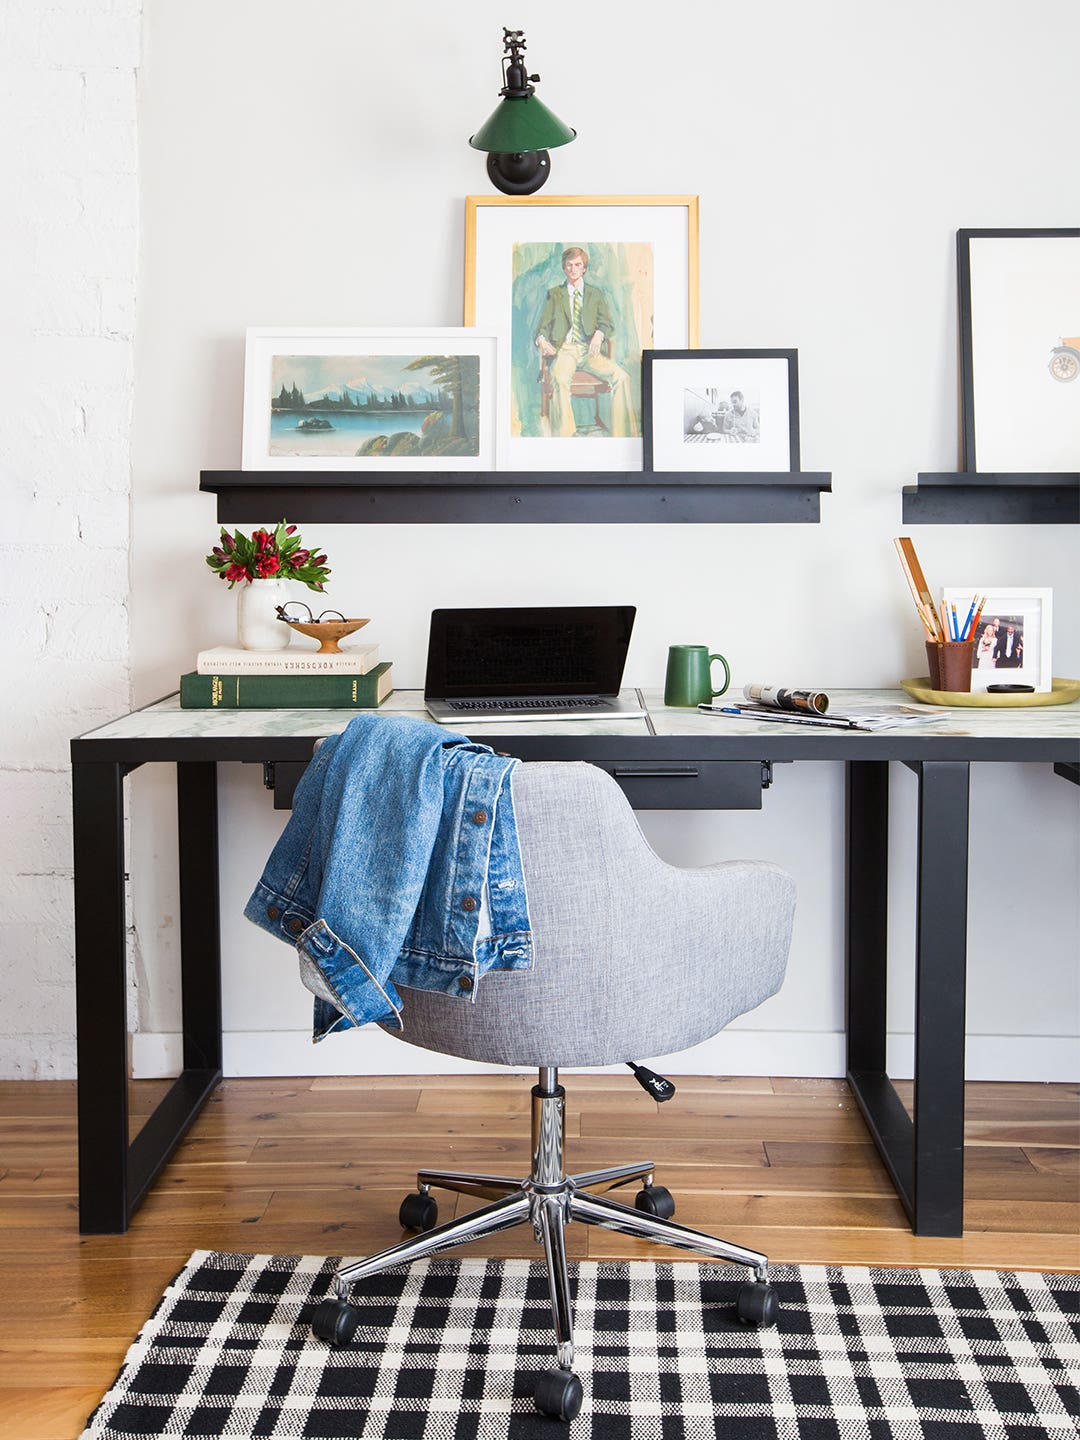 The Cure to WFH Fatigue Is a Home Office Revamp